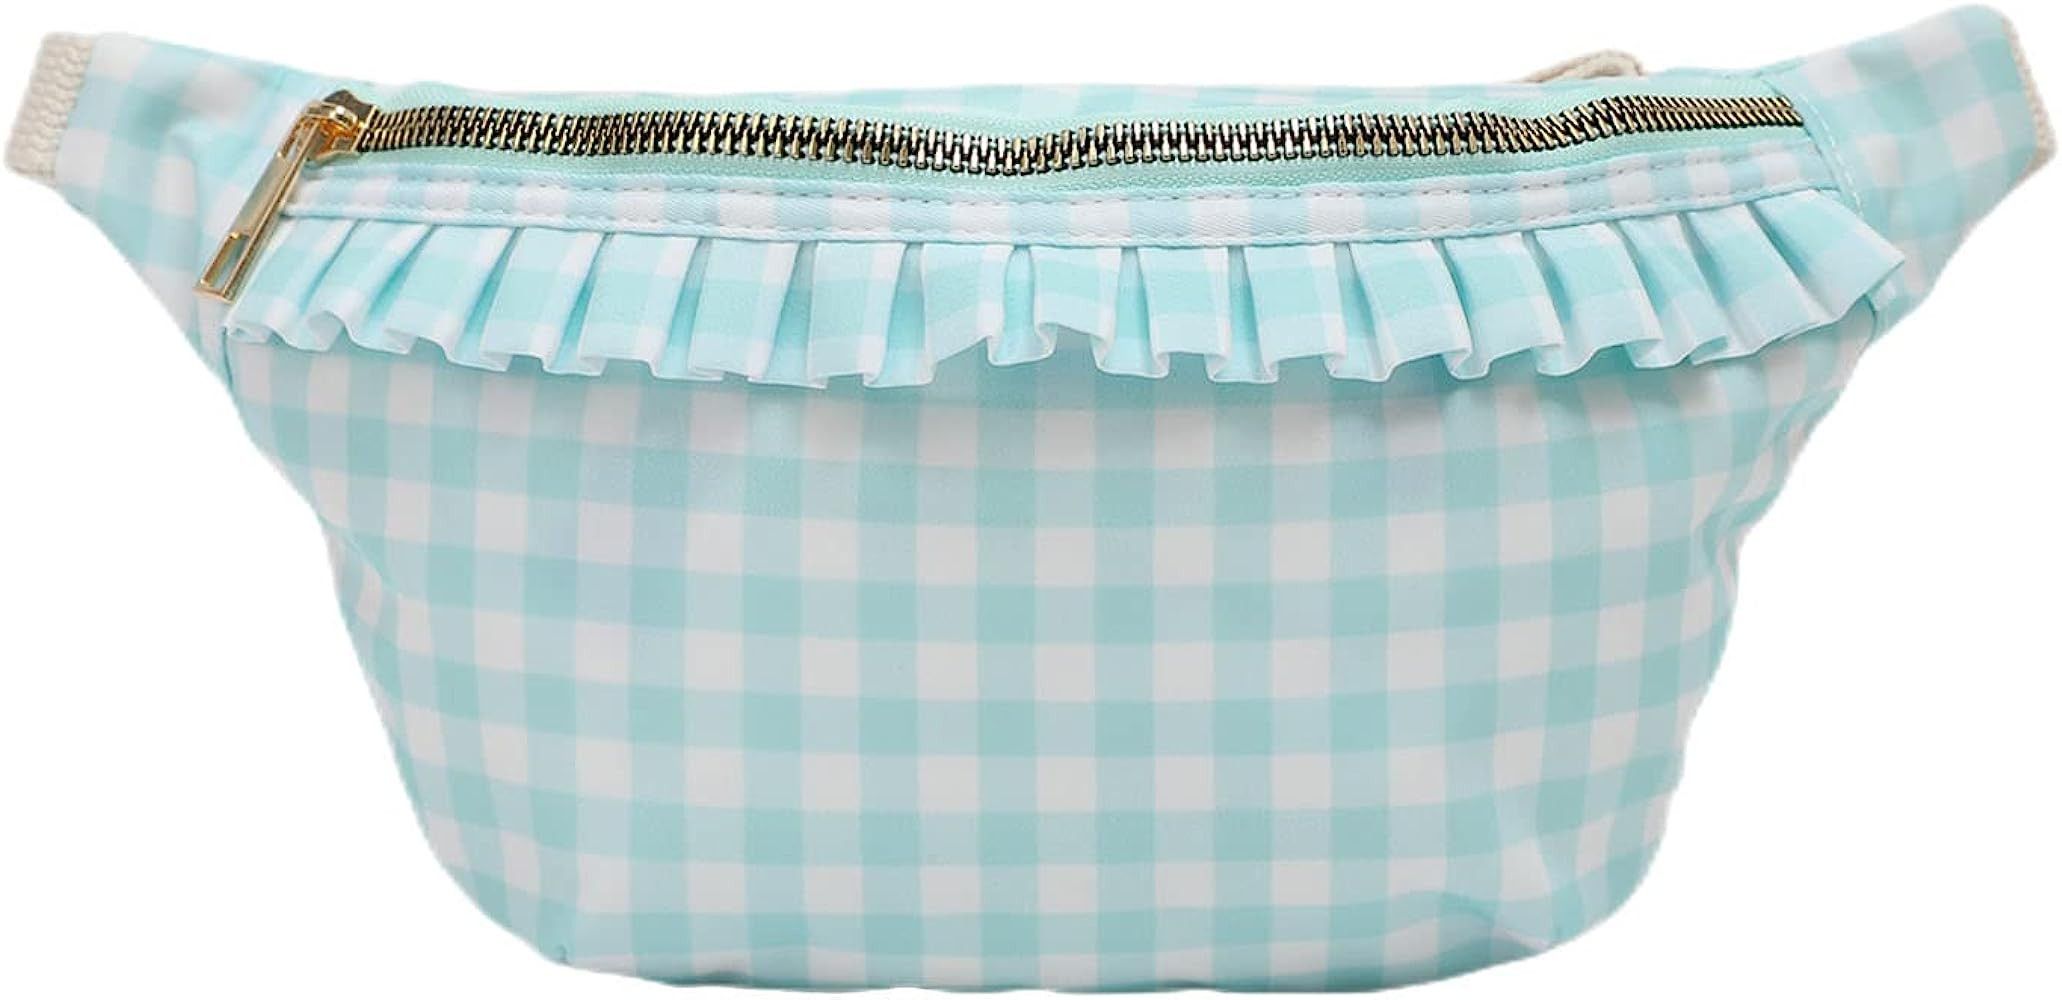 EMBRUNIOICE Belt Bag for Women Gingham Ruffle Crossbody Fanny Pack with Adjustable Strap,Fashion ... | Amazon (US)